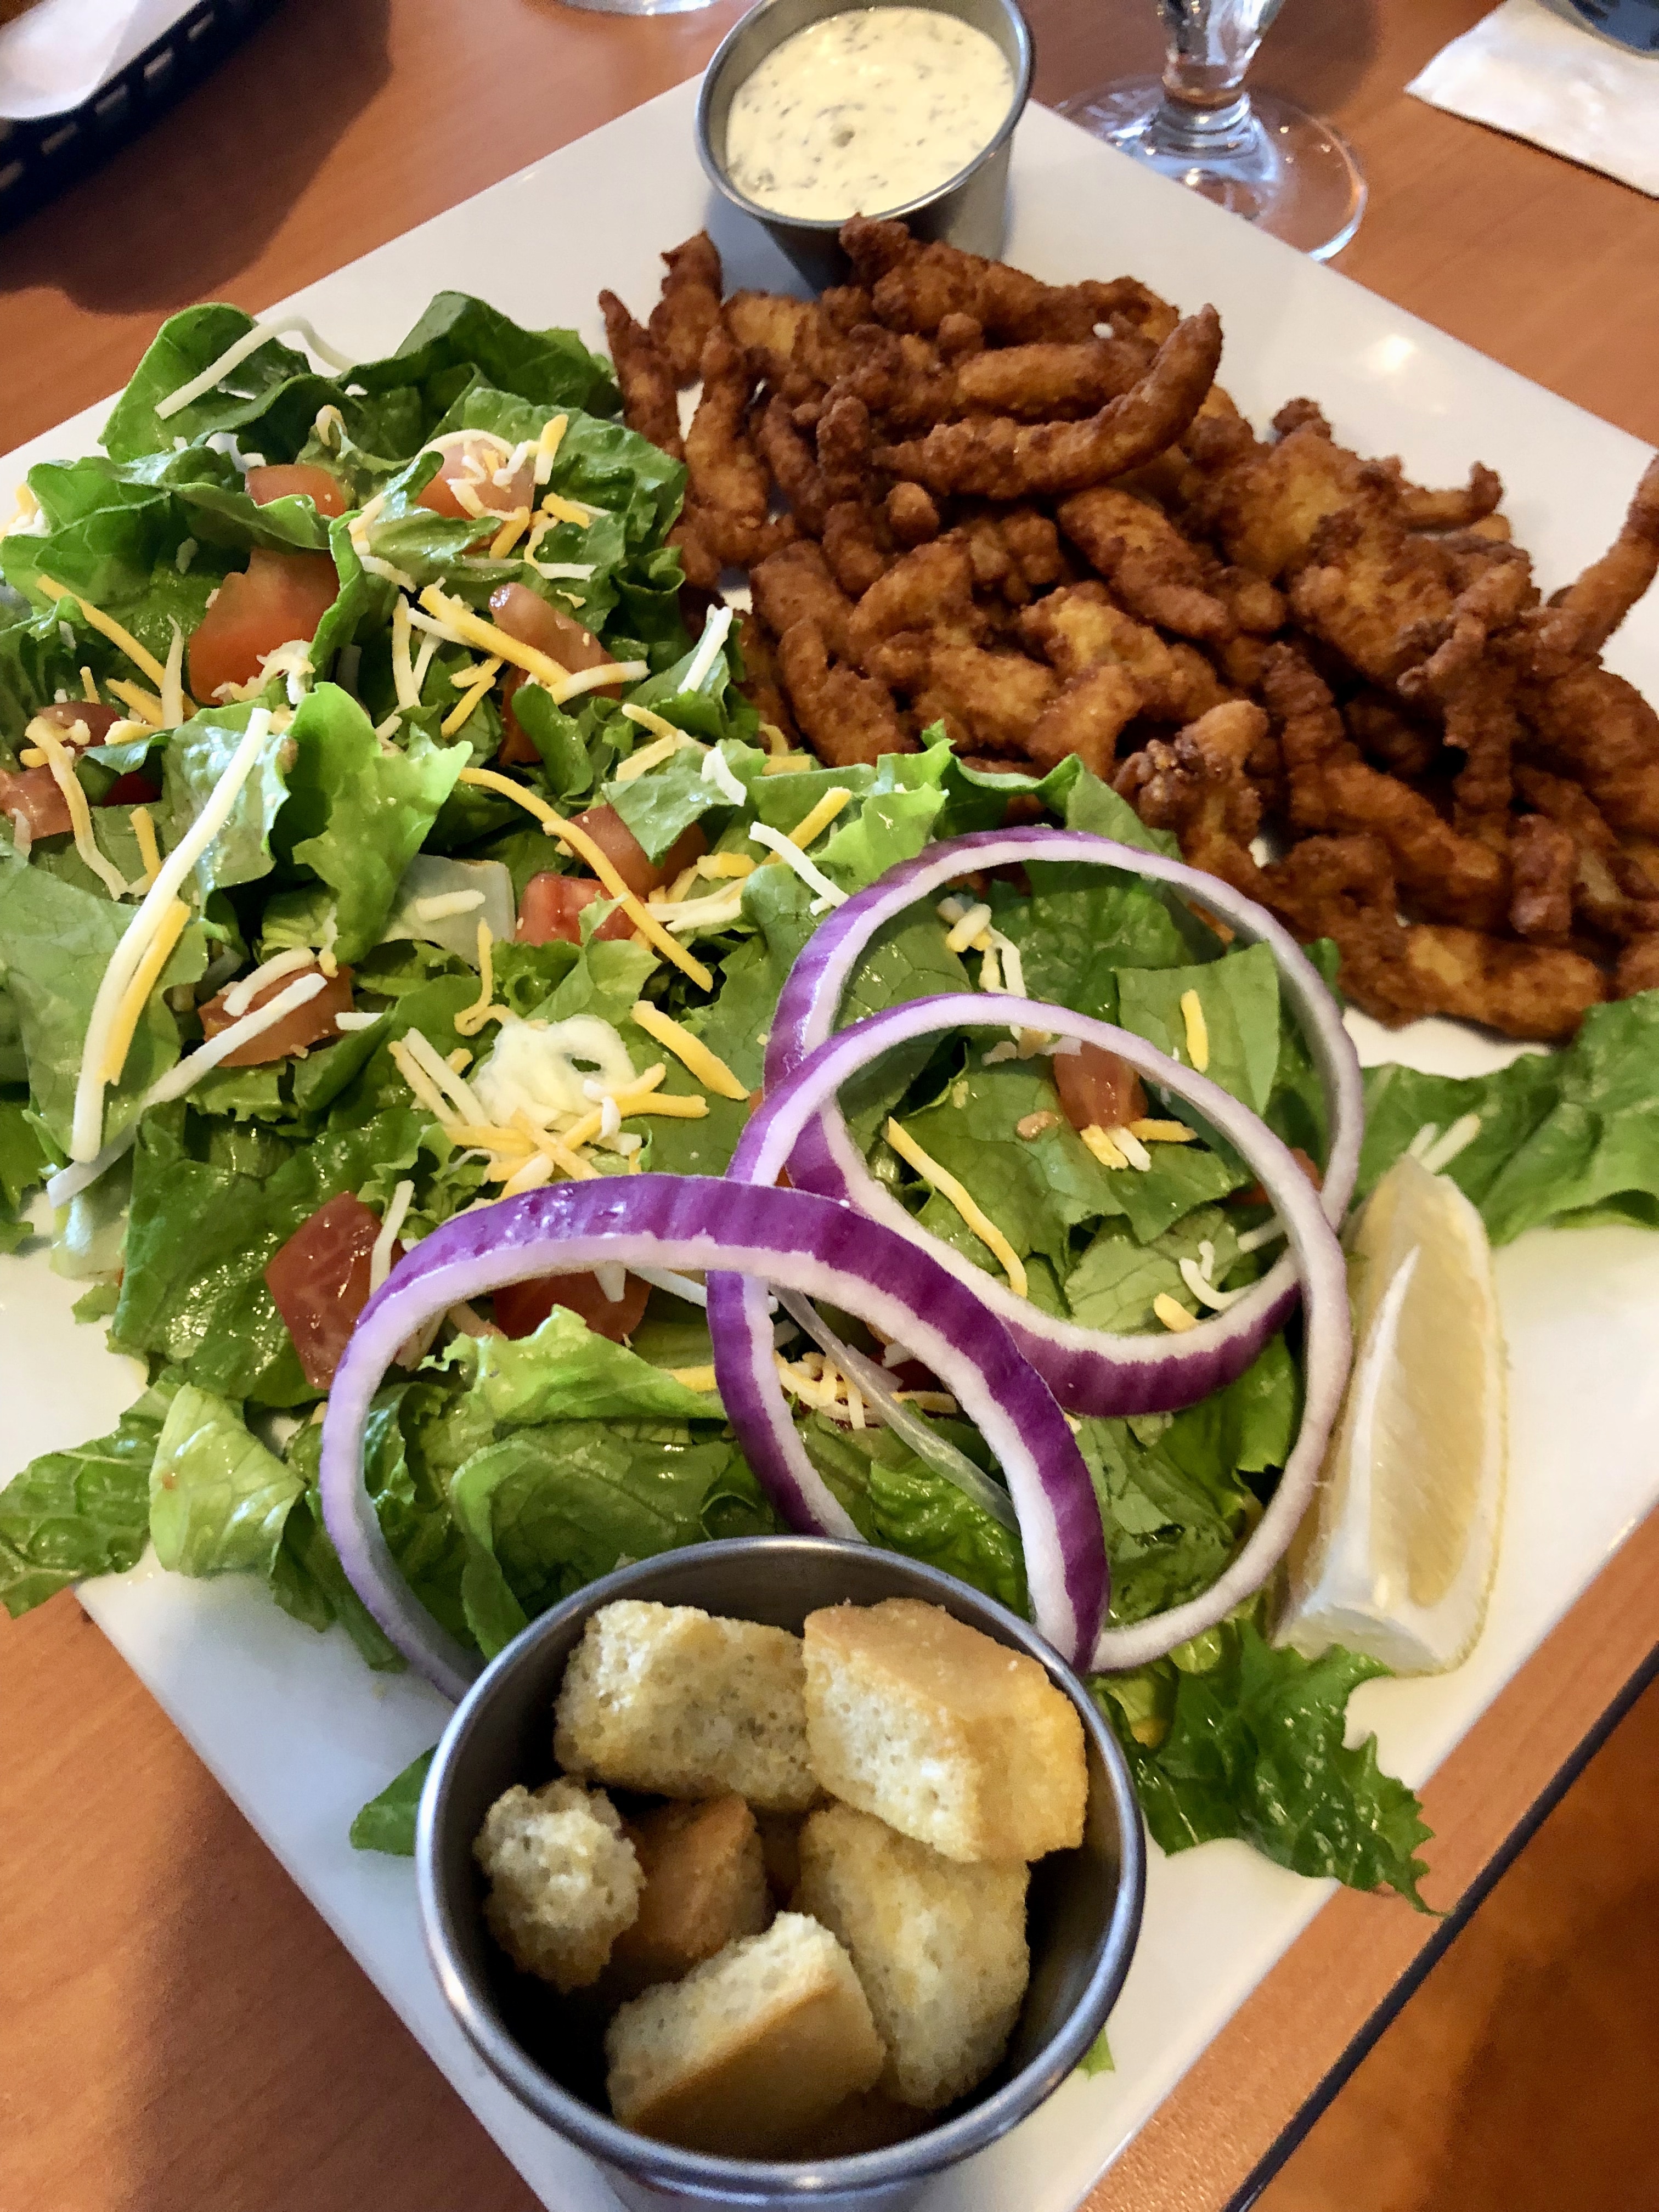 Fried Clams and Side Salad